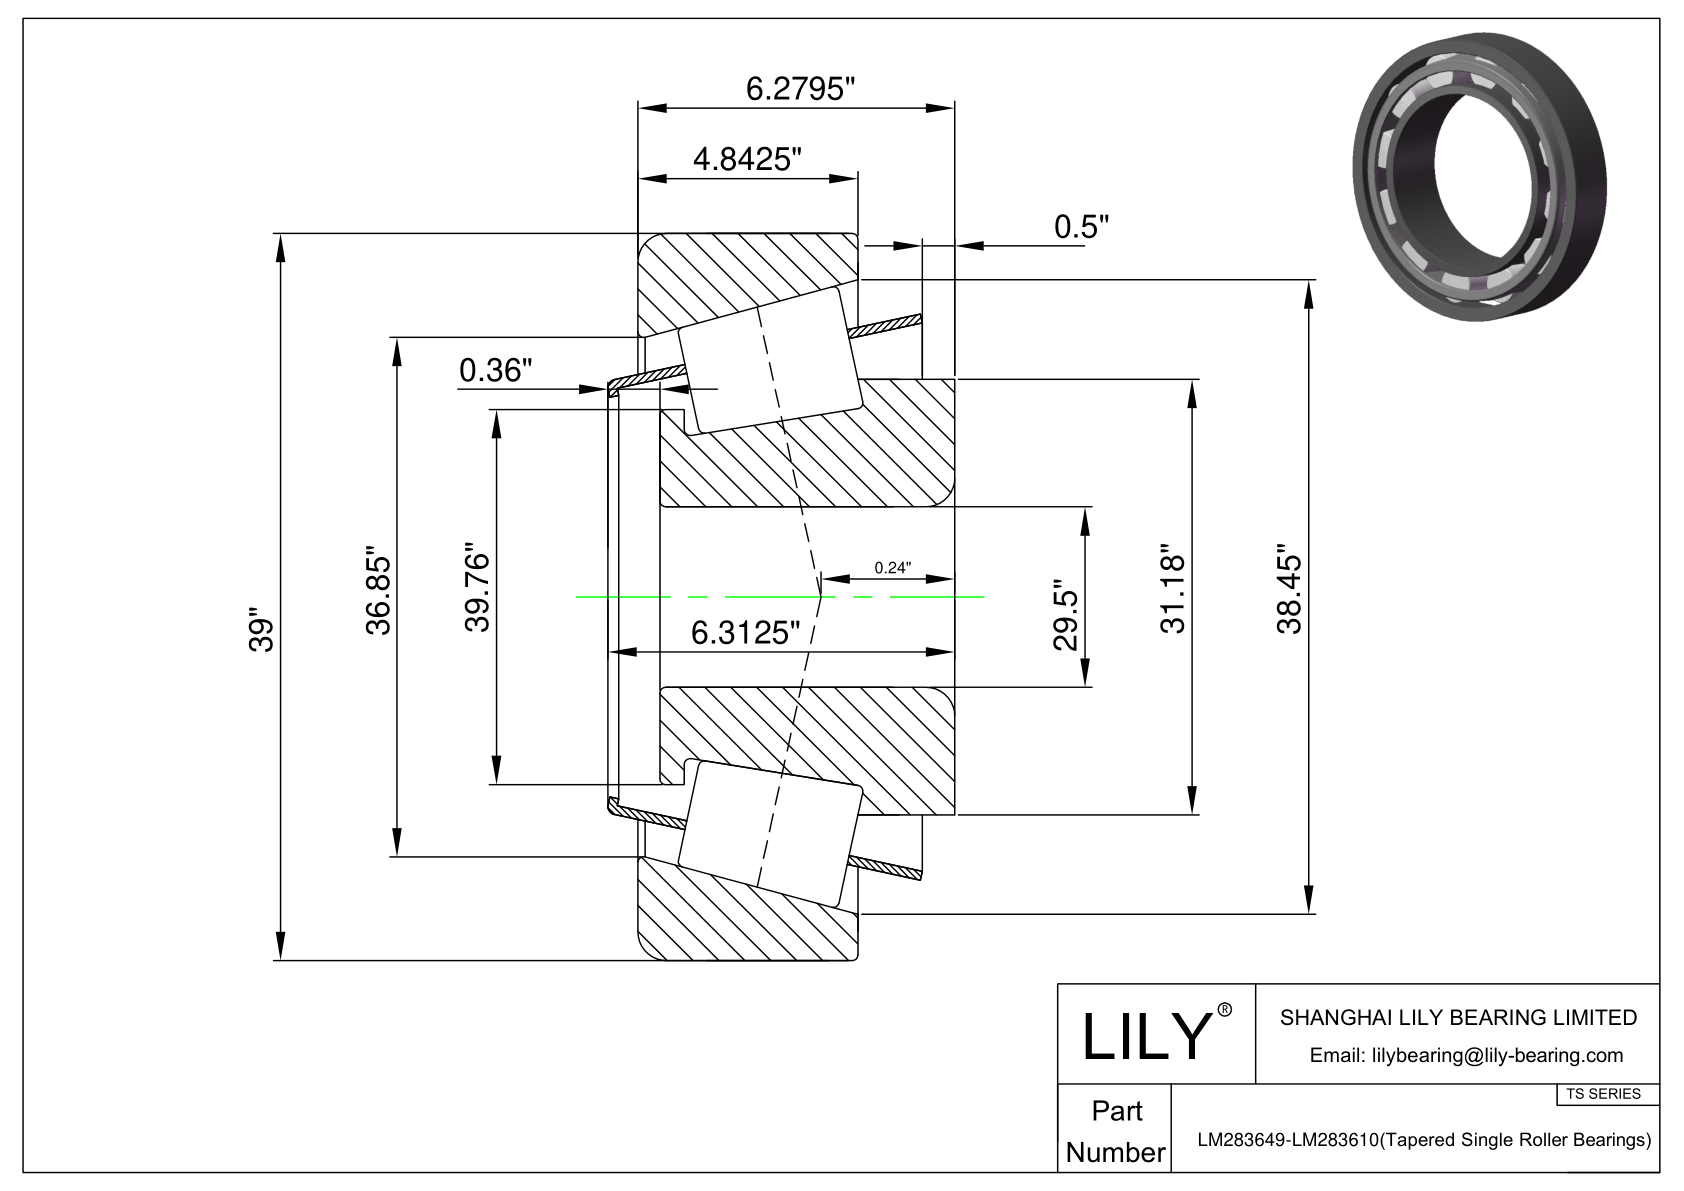 LM283649-LM283610 TS (Tapered Single Roller Bearings) (Imperial) cad drawing